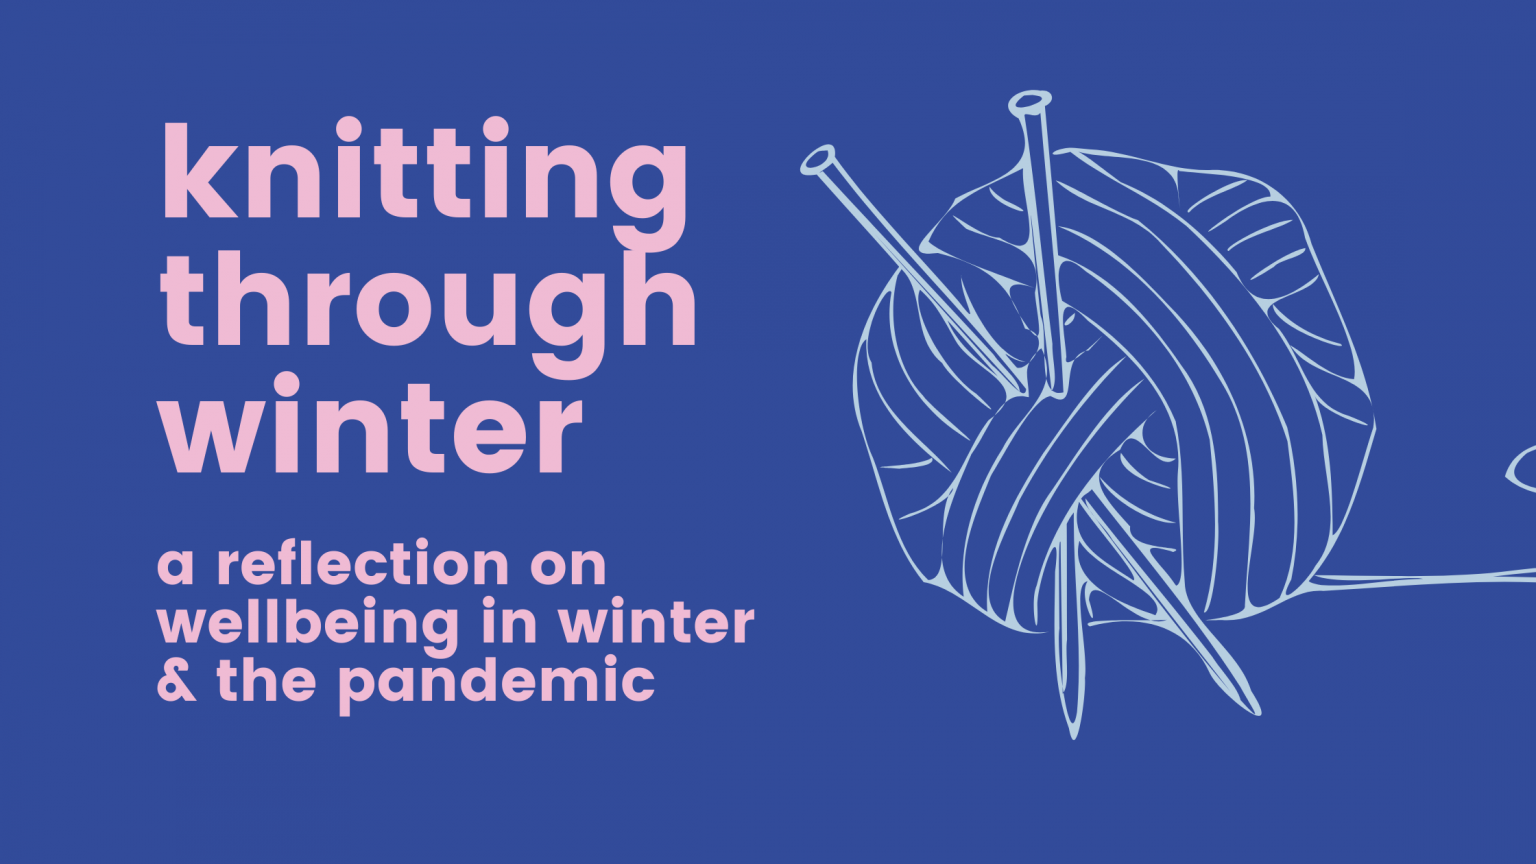 Knitting through winter - a reflection on wellbeing in winter and the pandemic